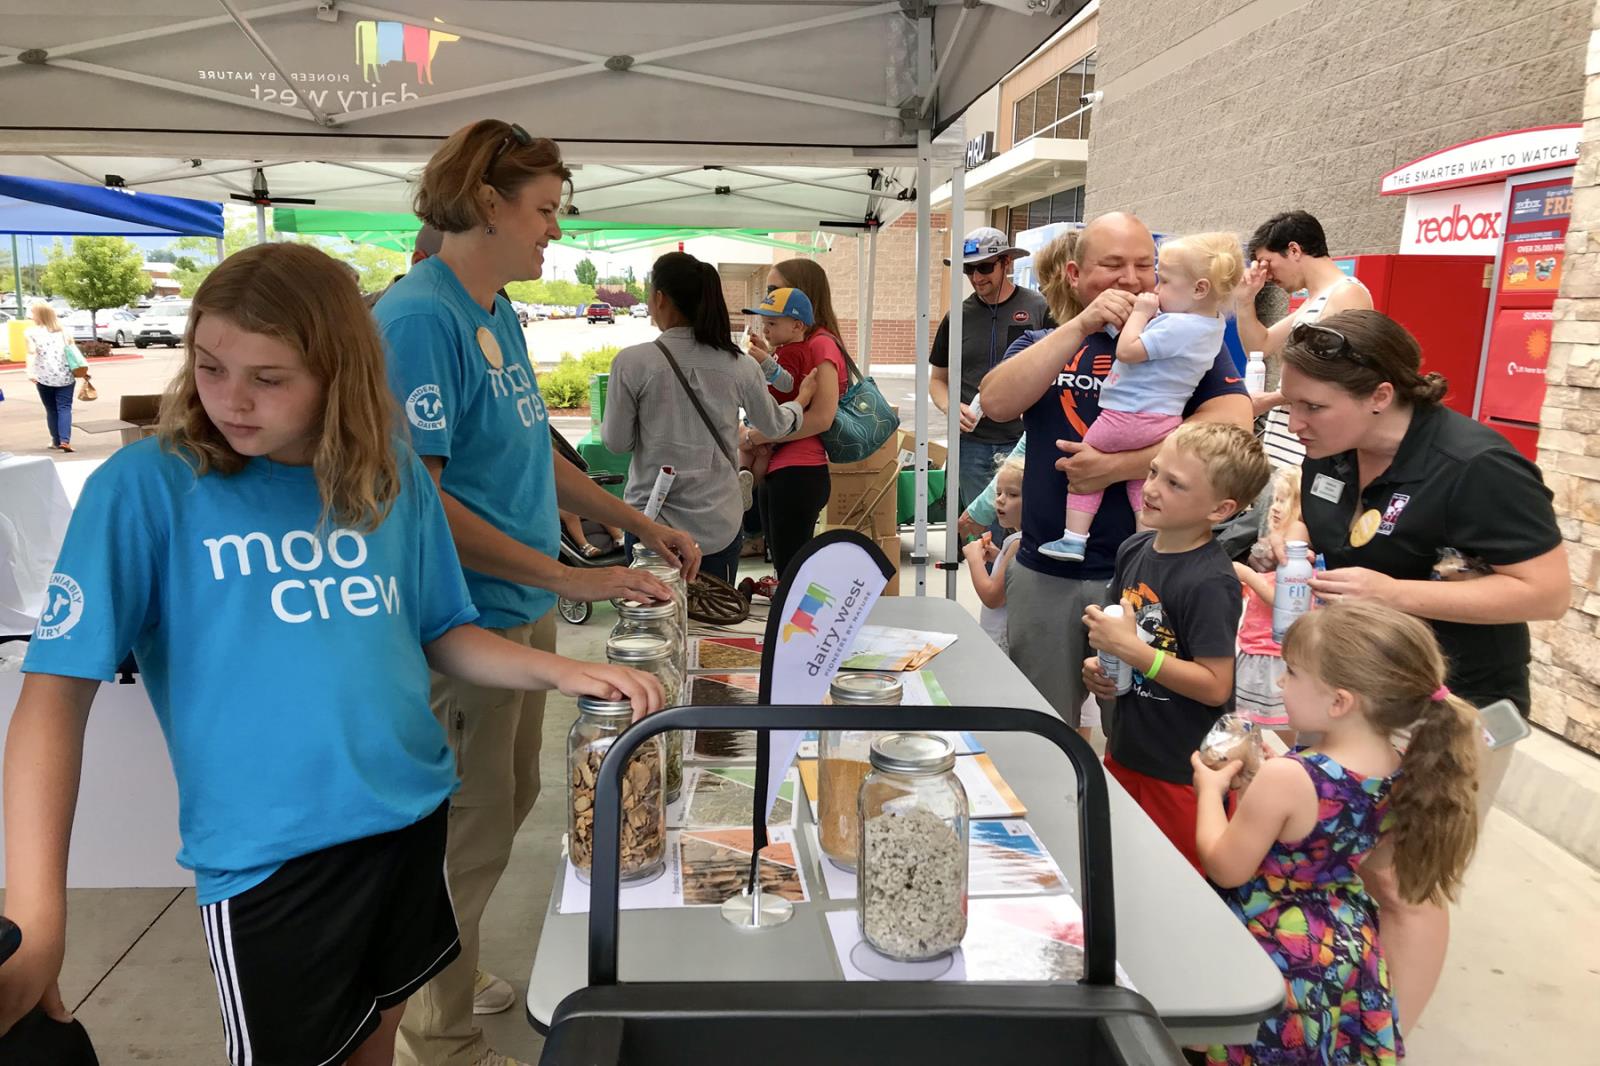 People learn about dairy nutrition and are encouraged to donate “Moo Bucks” during a kick-off event at a Meridian Albertsons grocery store June 1. The campaign aims to raise money to provide needy families with milk and other dairy products. 